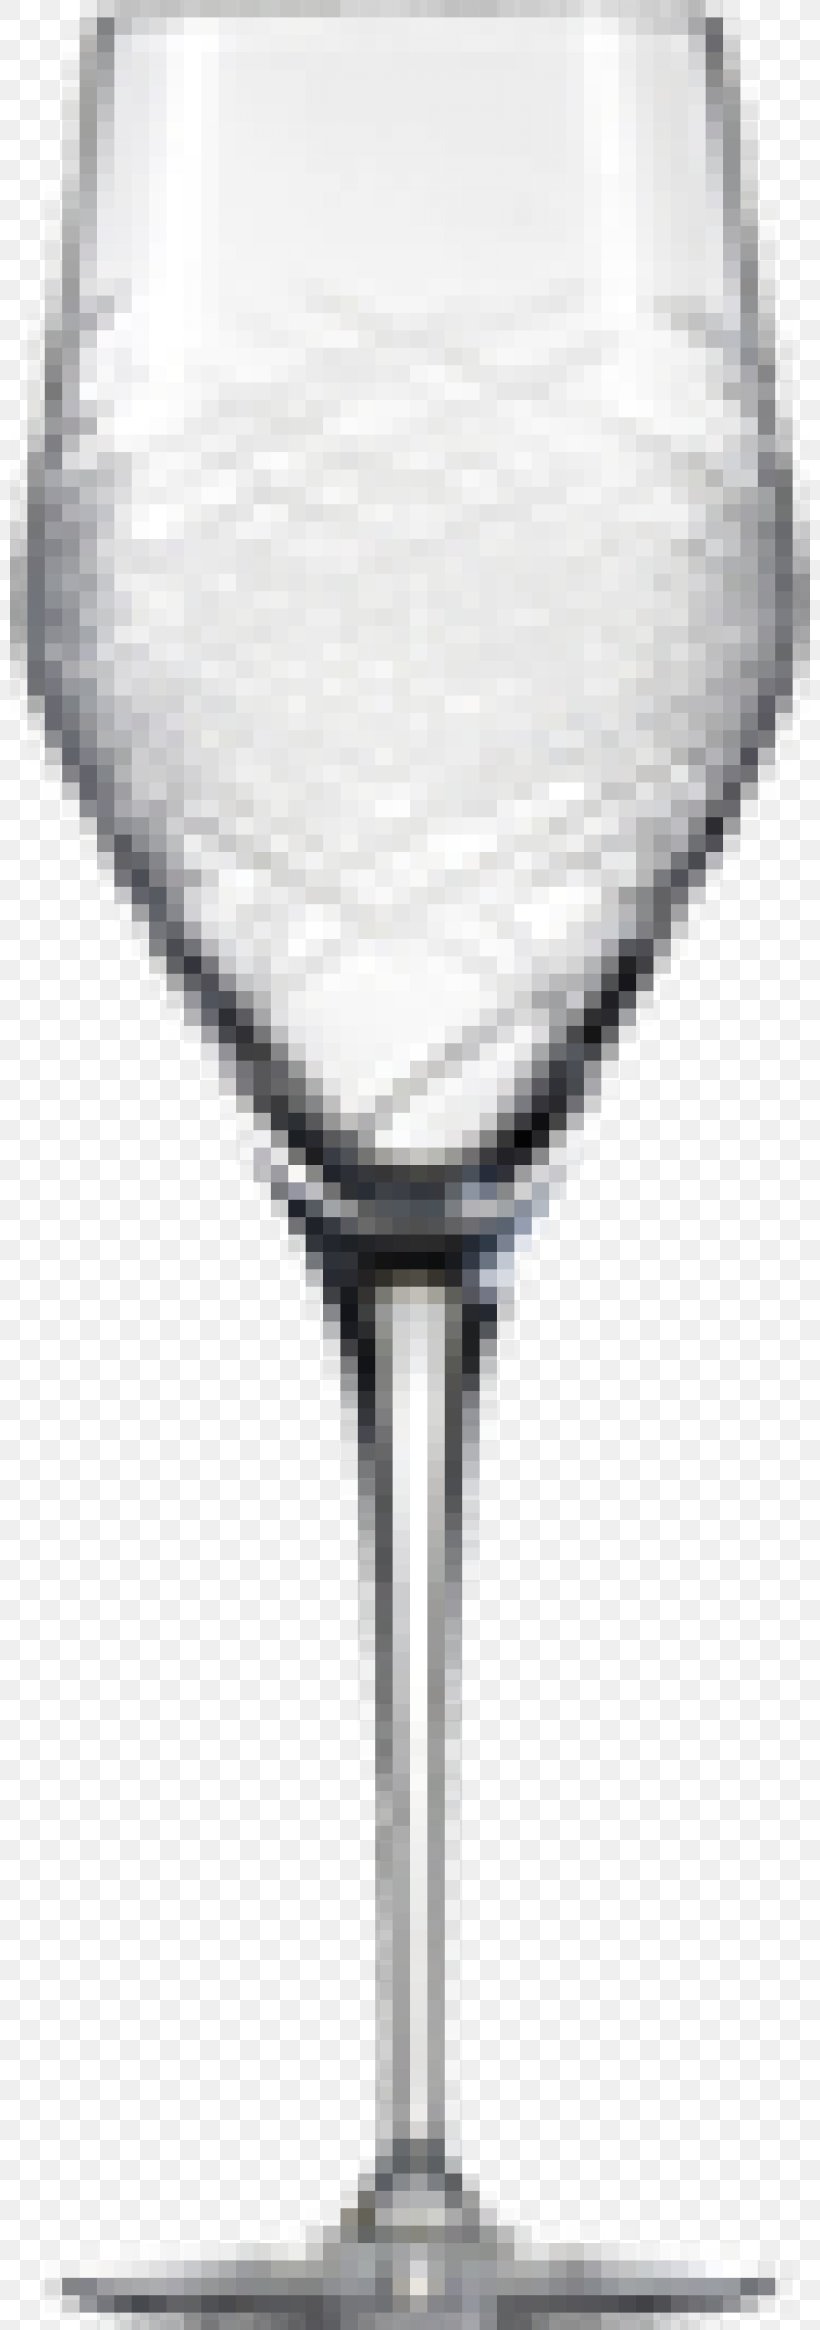 Wine Glass Champagne Glass Table-glass Cocktail Glass, PNG, 800x2330px, Wine Glass, Alcoholic Drink, Bar, Champagne Glass, Champagne Stemware Download Free